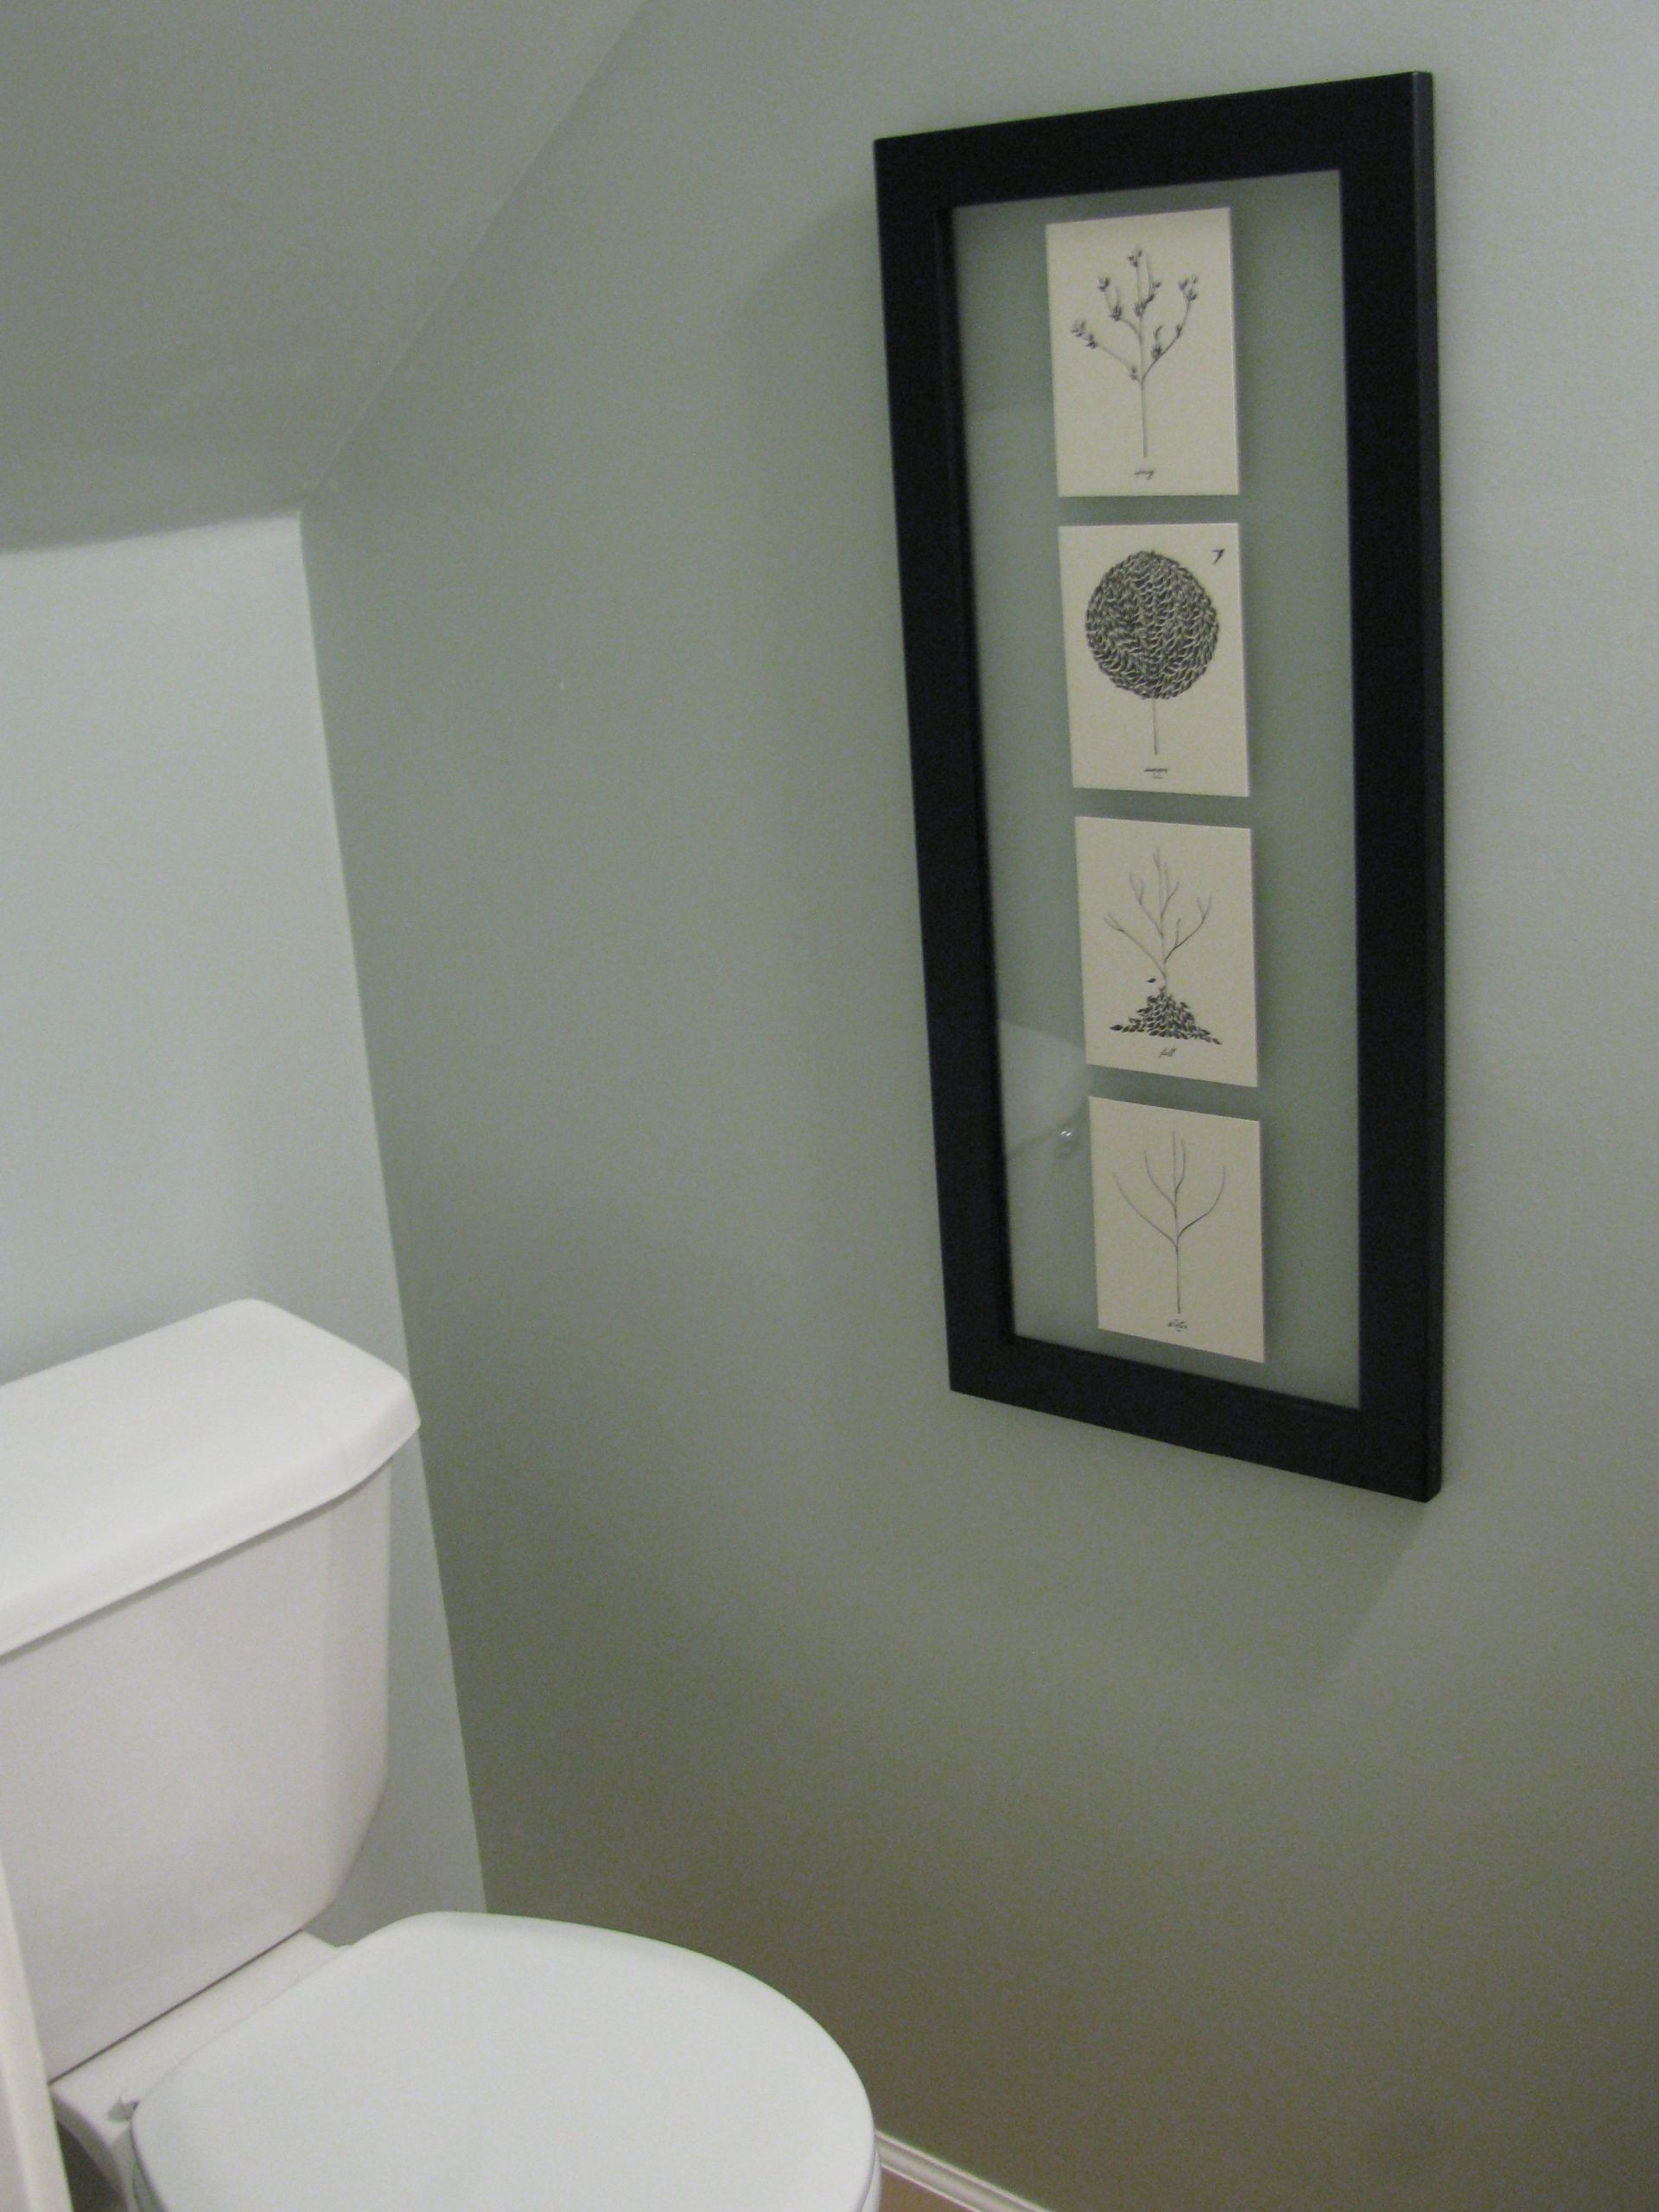 Bathroom Ceiling Paint Home Depot
 Pin by Cheri Silverstein on Master bathroom With images